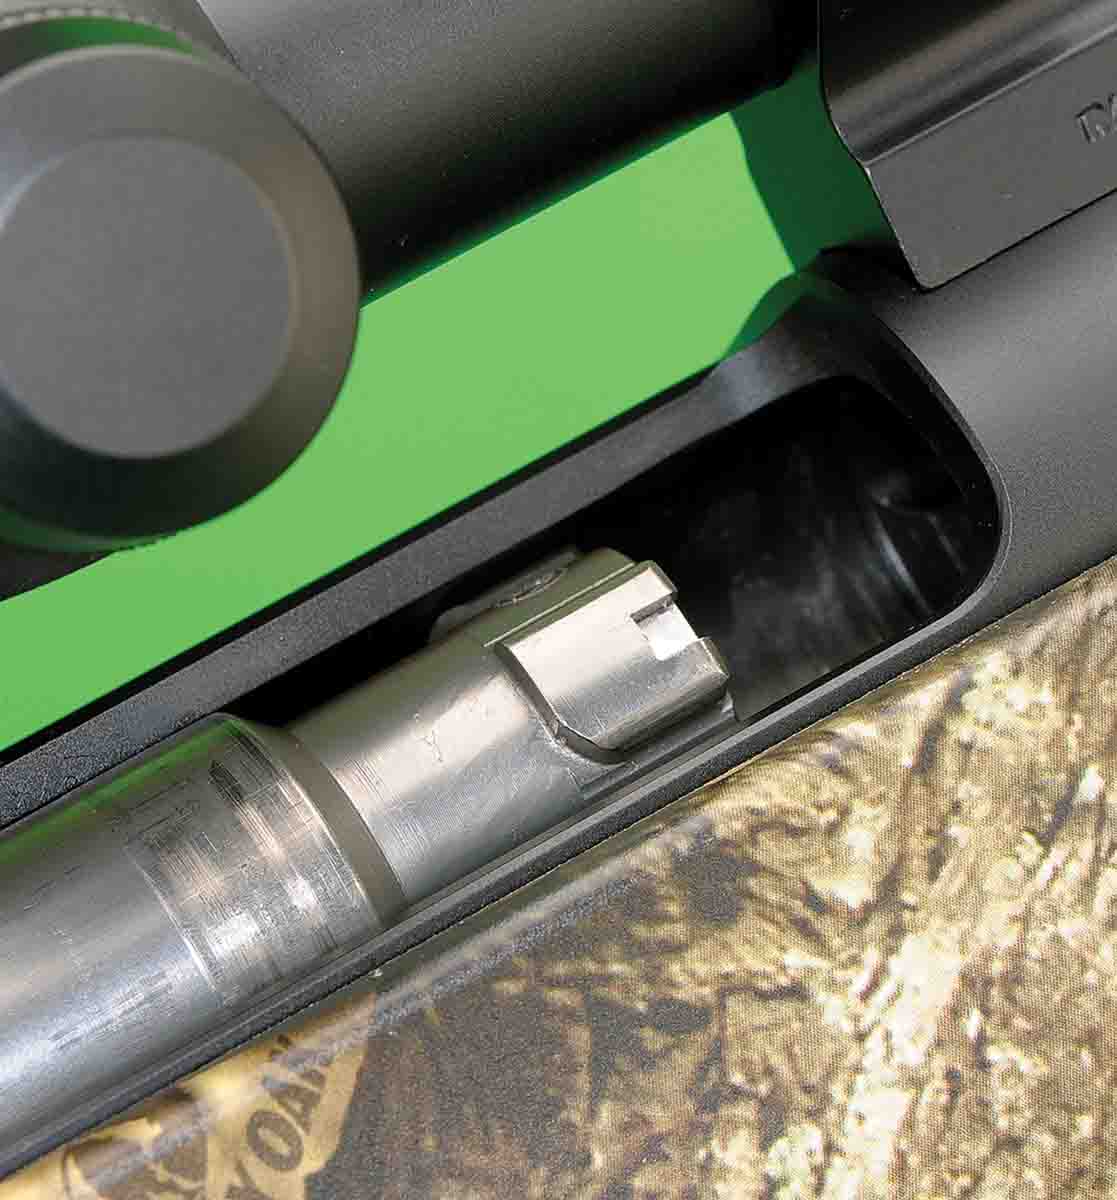 Internal machining and a bolt that clears the detachable magazine help allow for smooth loading or extracting of cartridges.